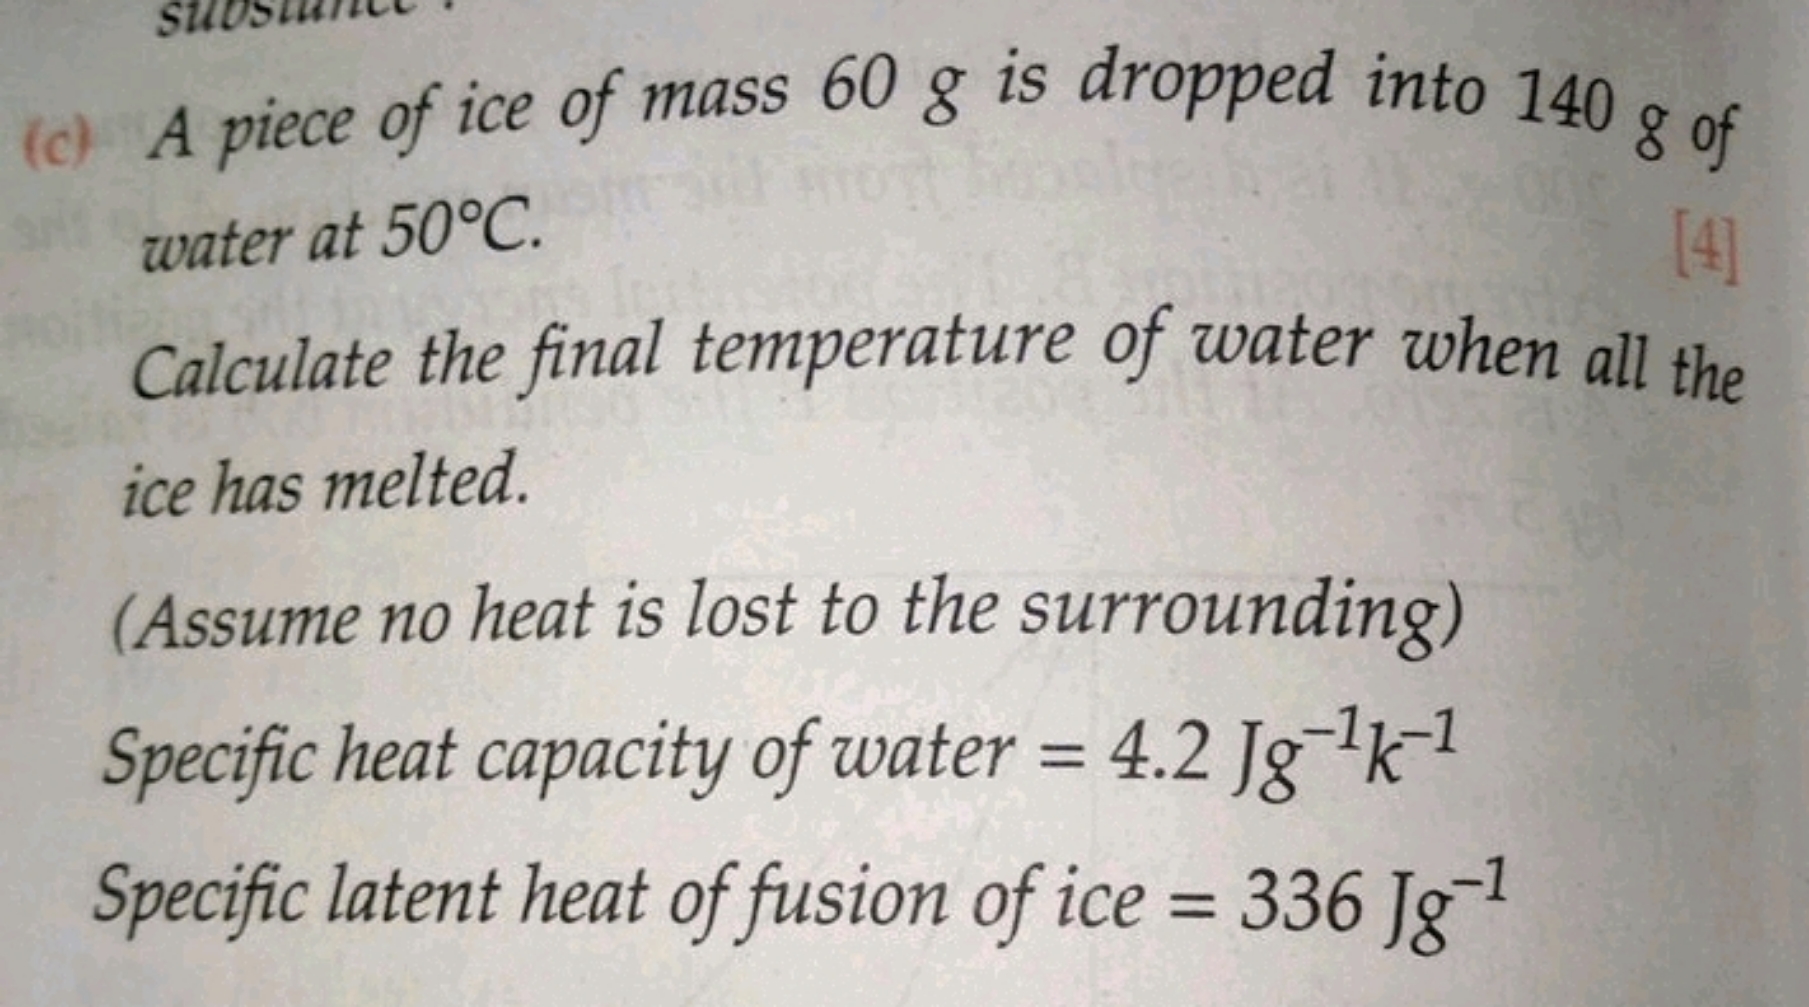 (c) A piece of ice of mass 60 g is dropped into 140 g of water at 50∘C